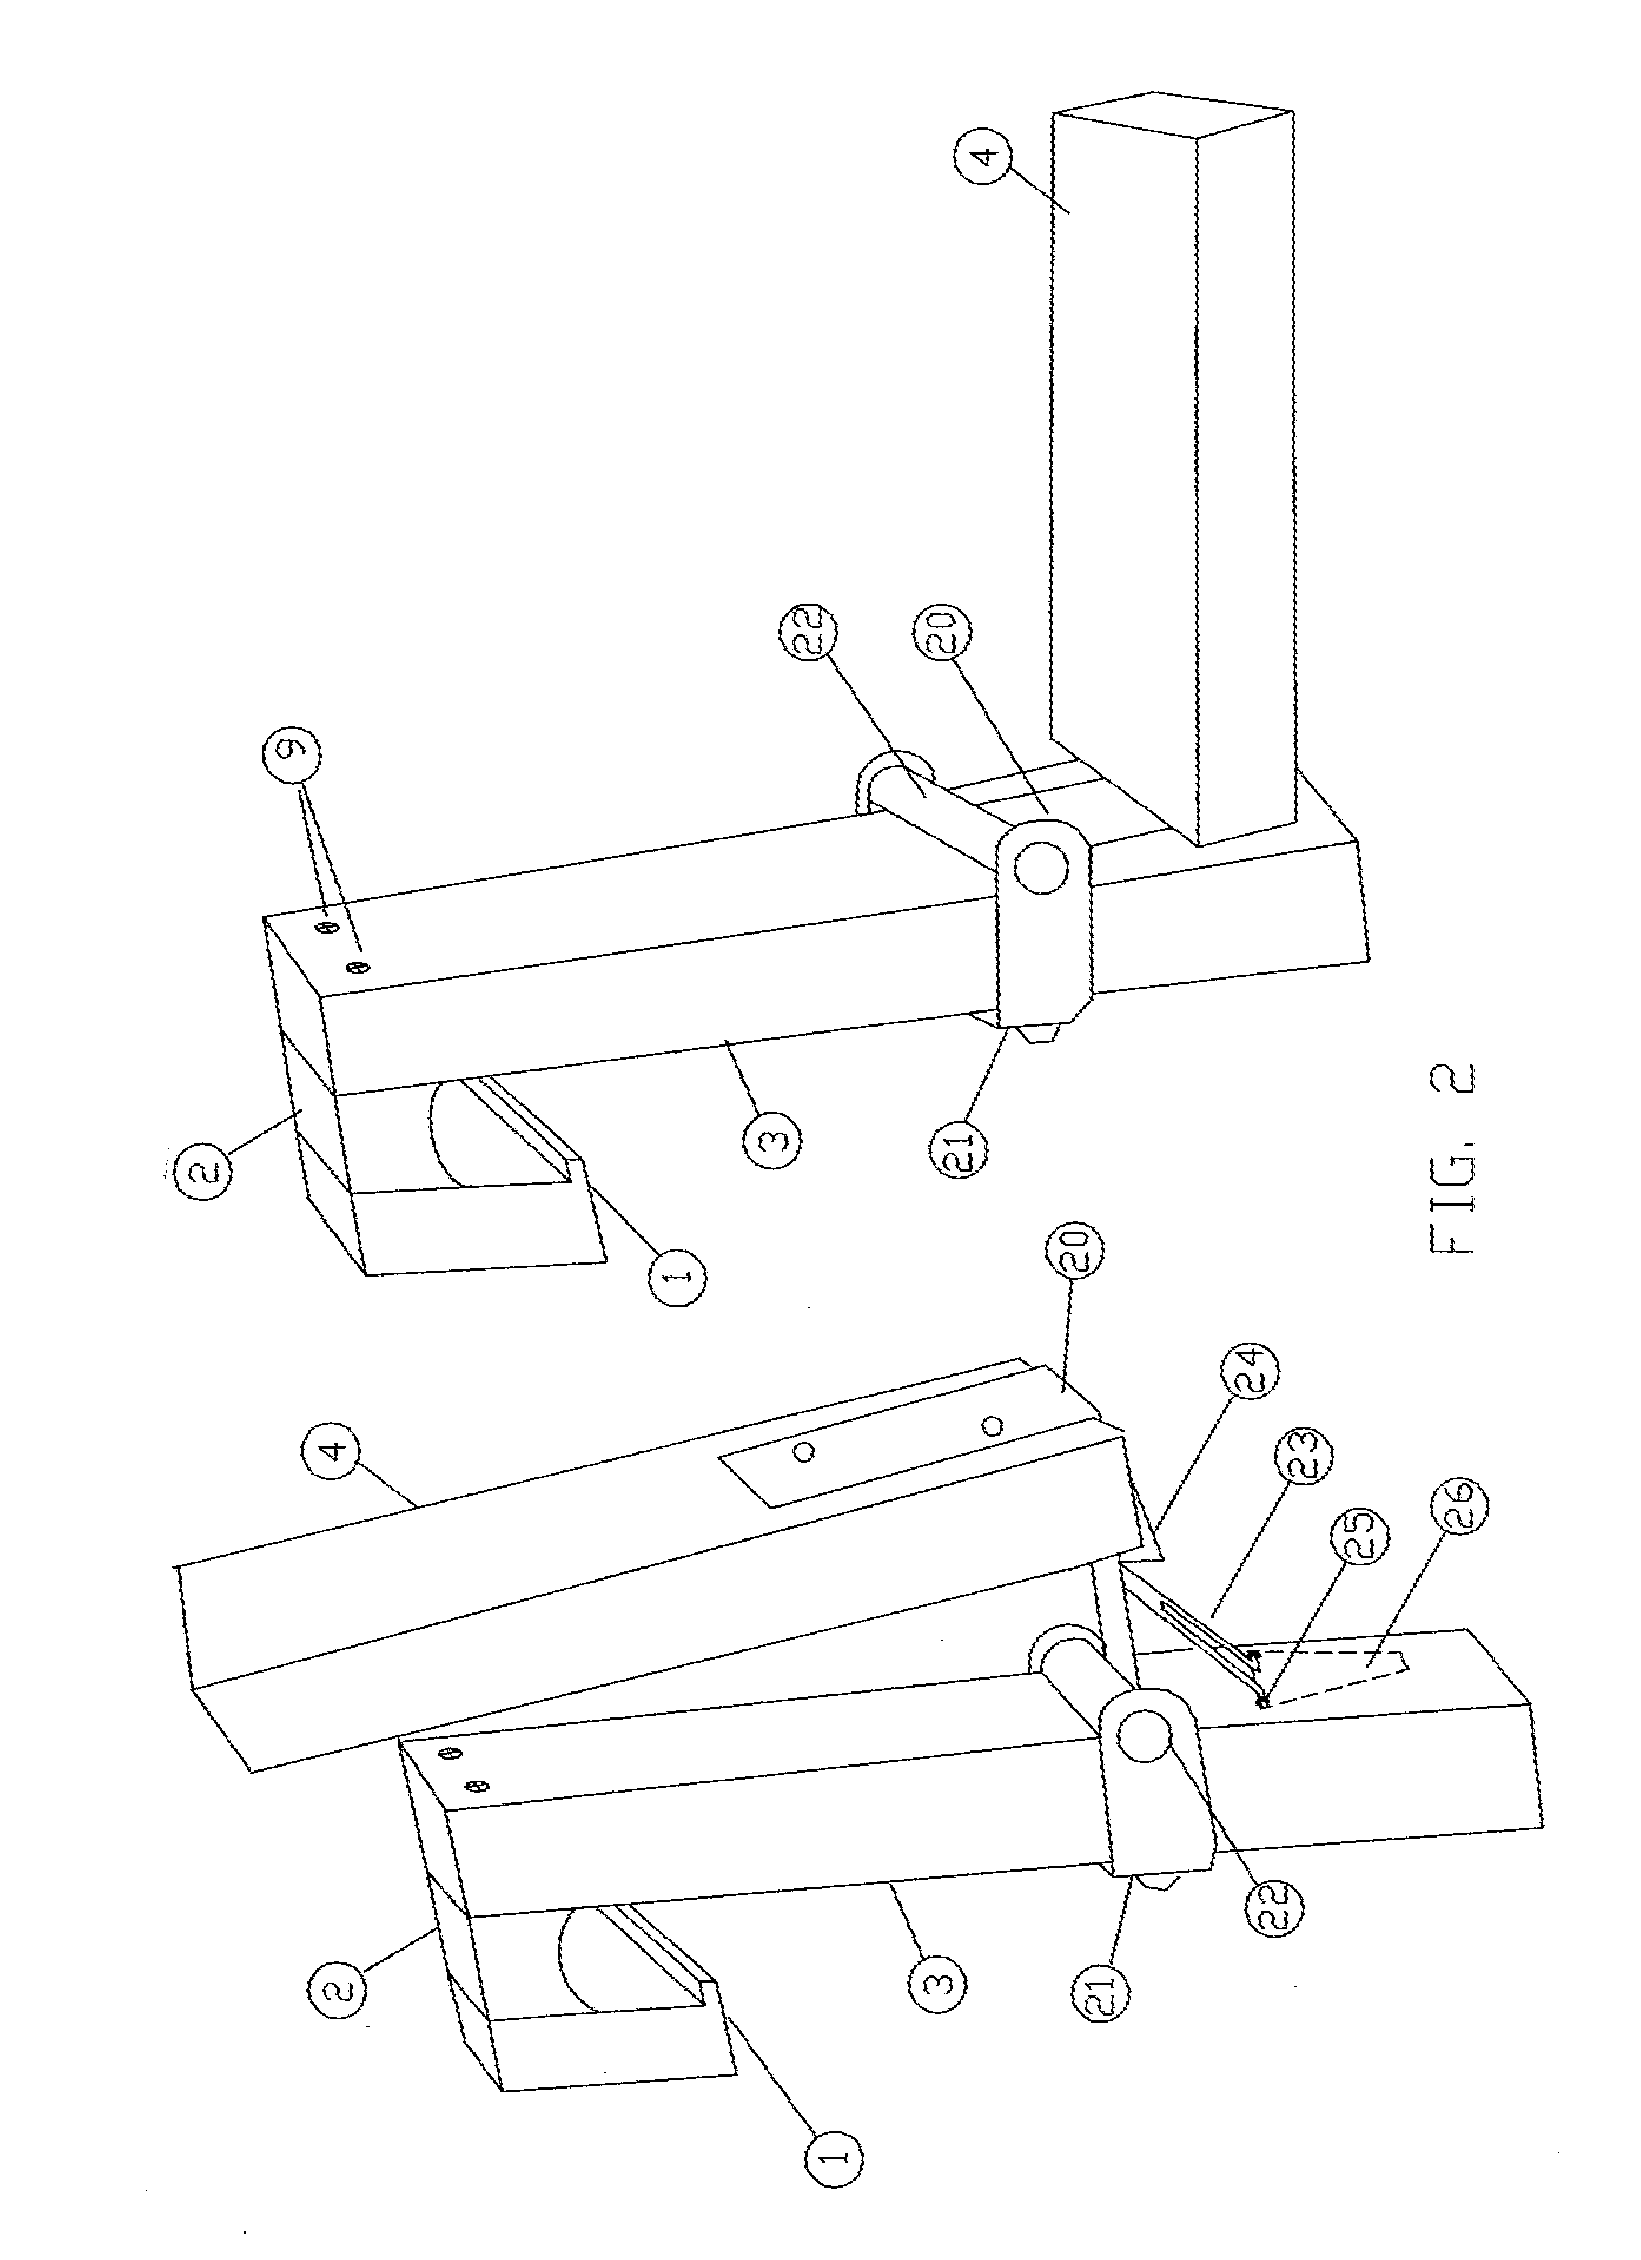 Removable armrest for sectional seating